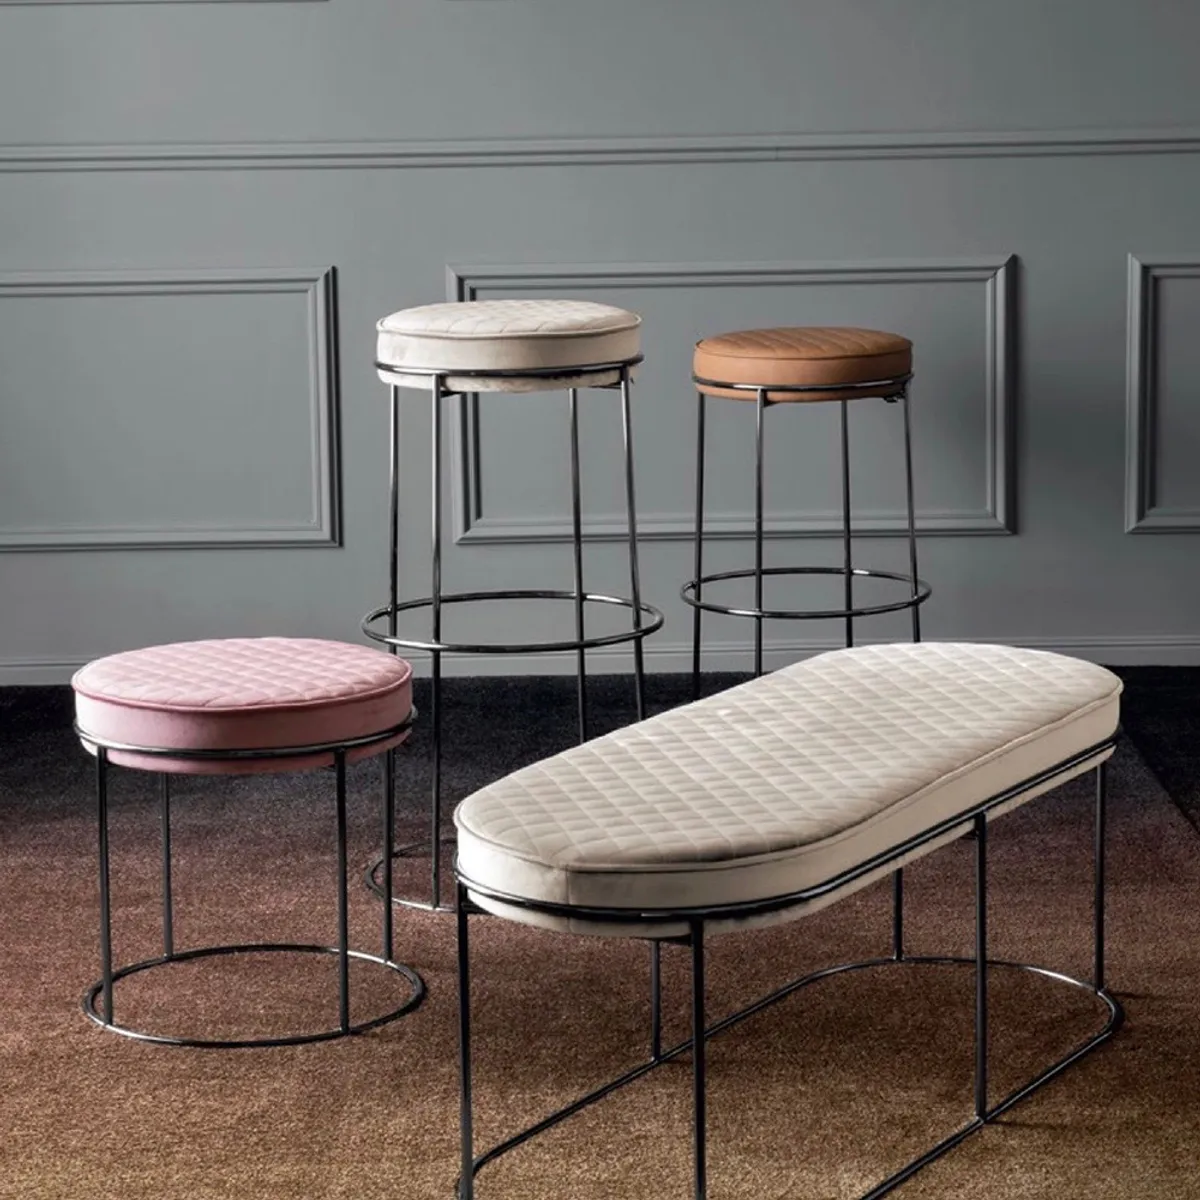 Atollo Stools Ottomans Inside Out Contracts 06